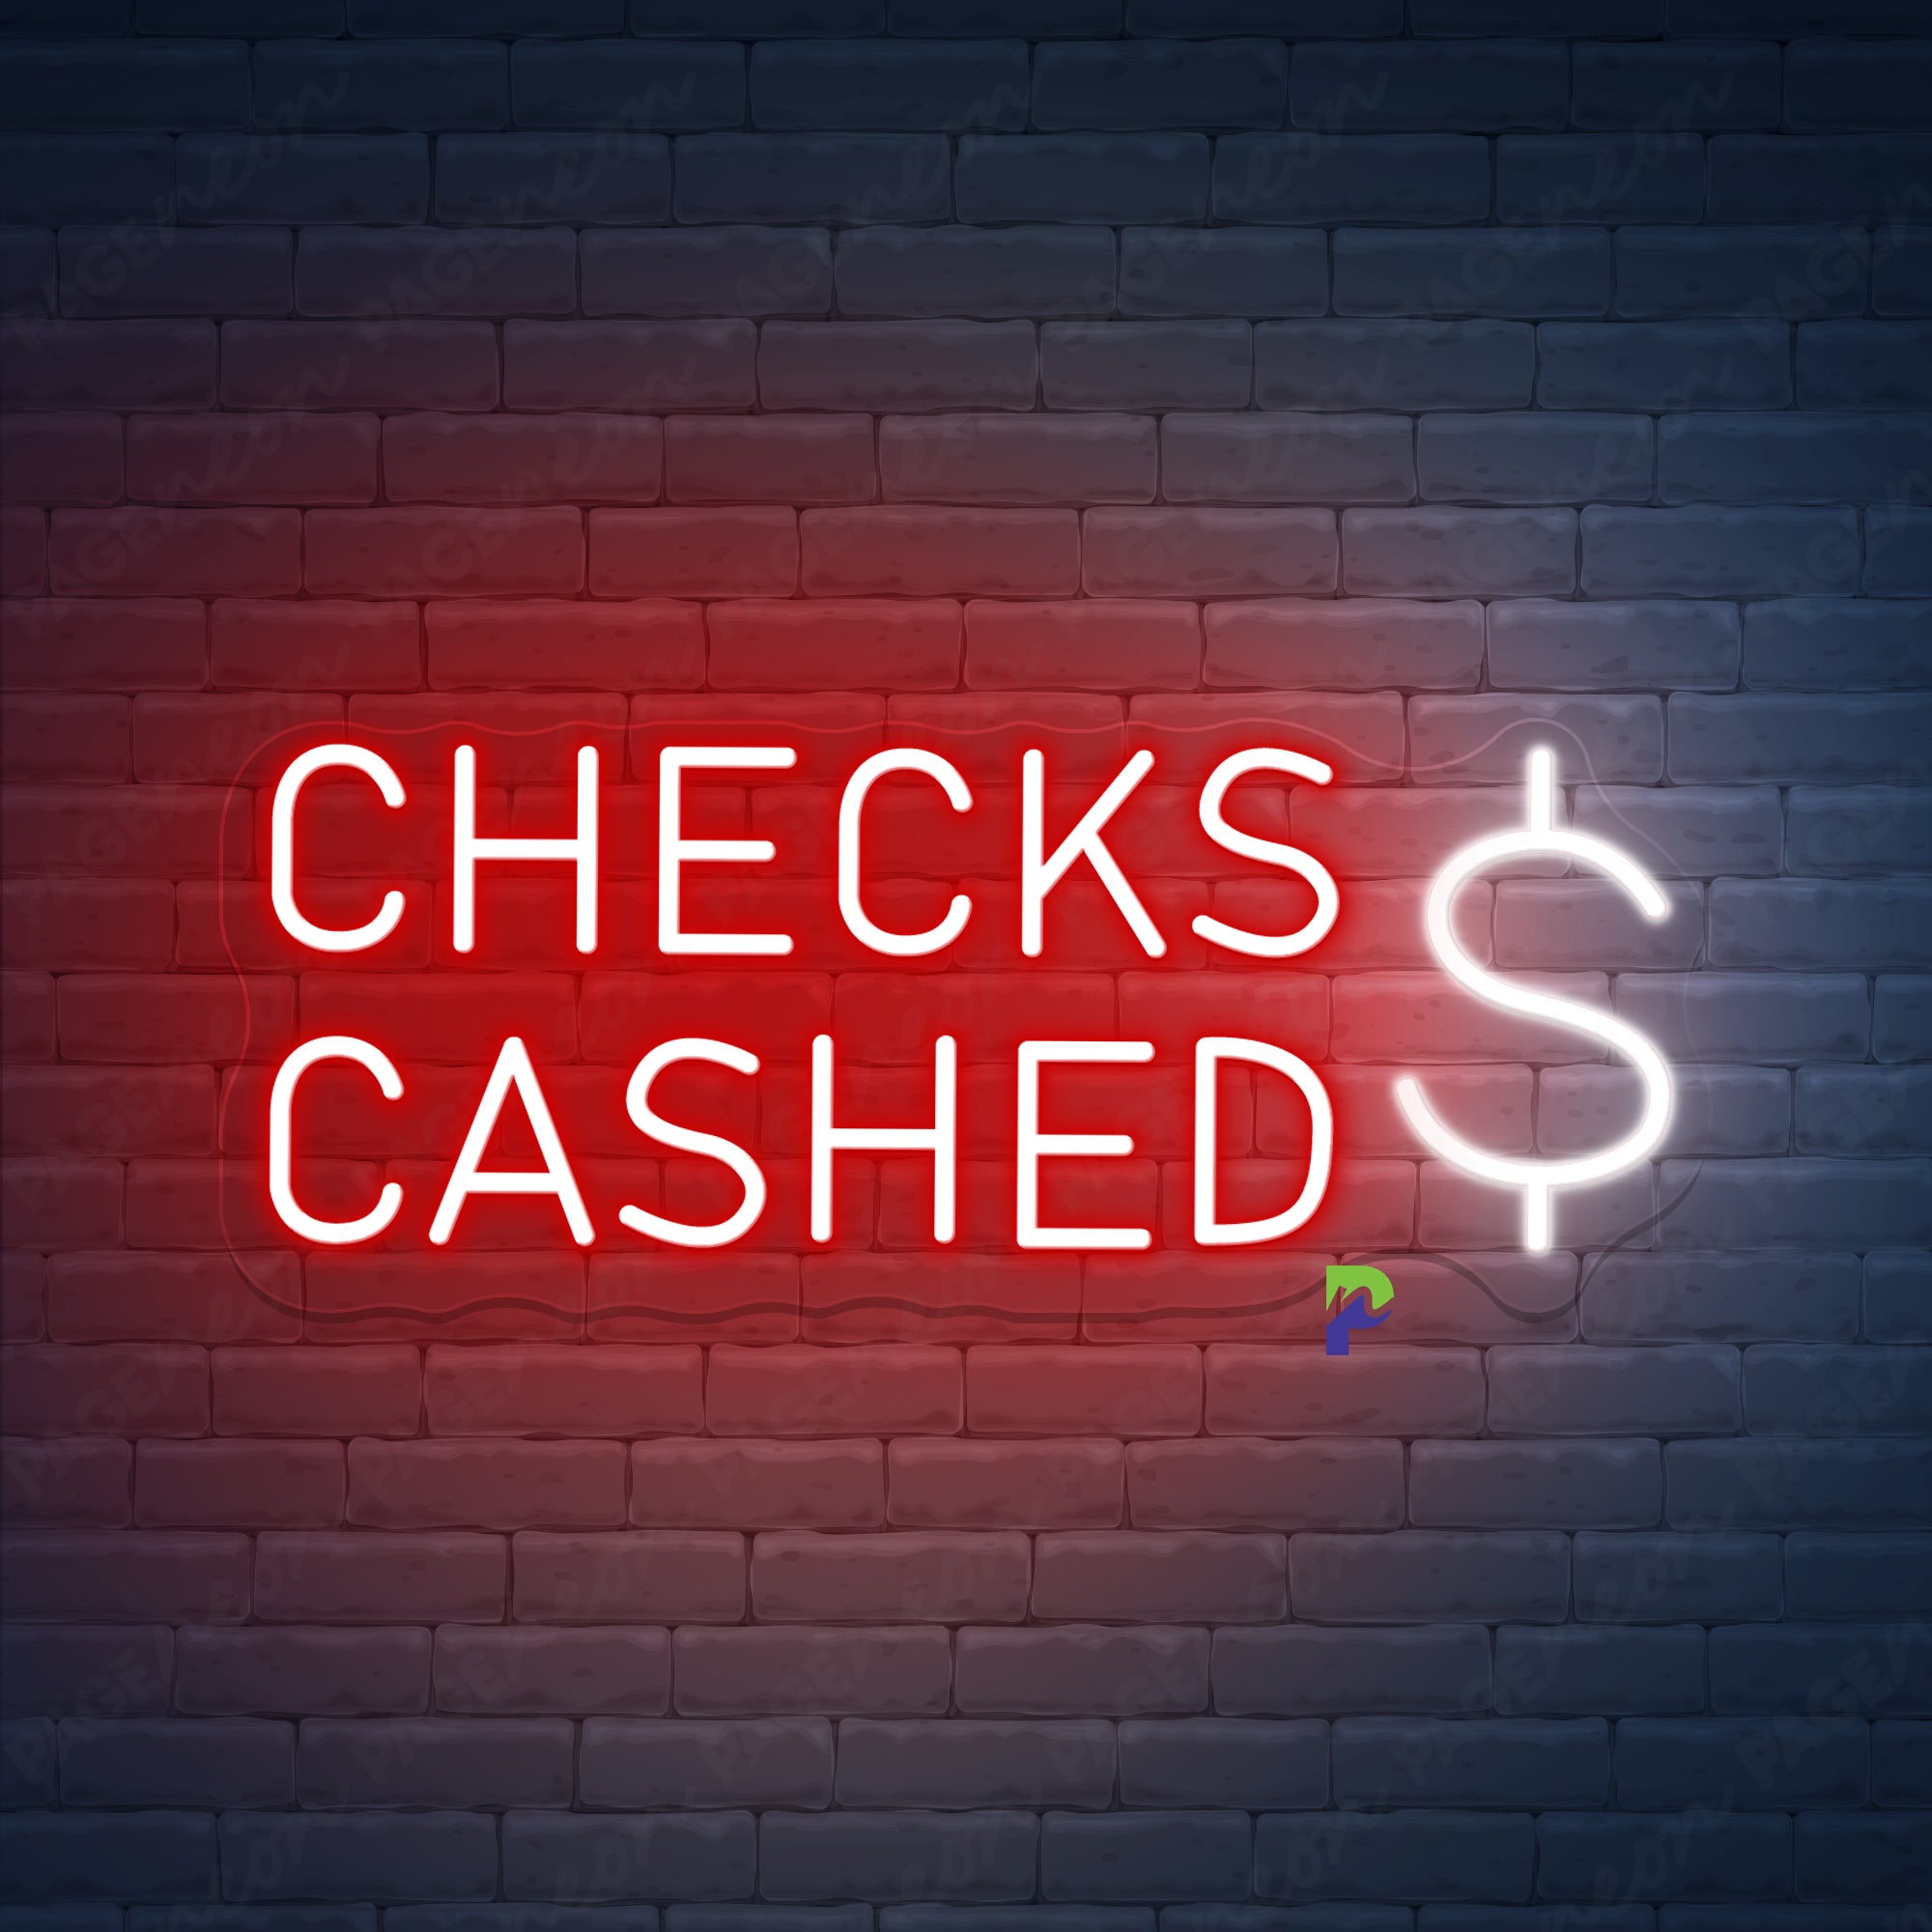 Cashed Checks Neon Sign Business Led Light